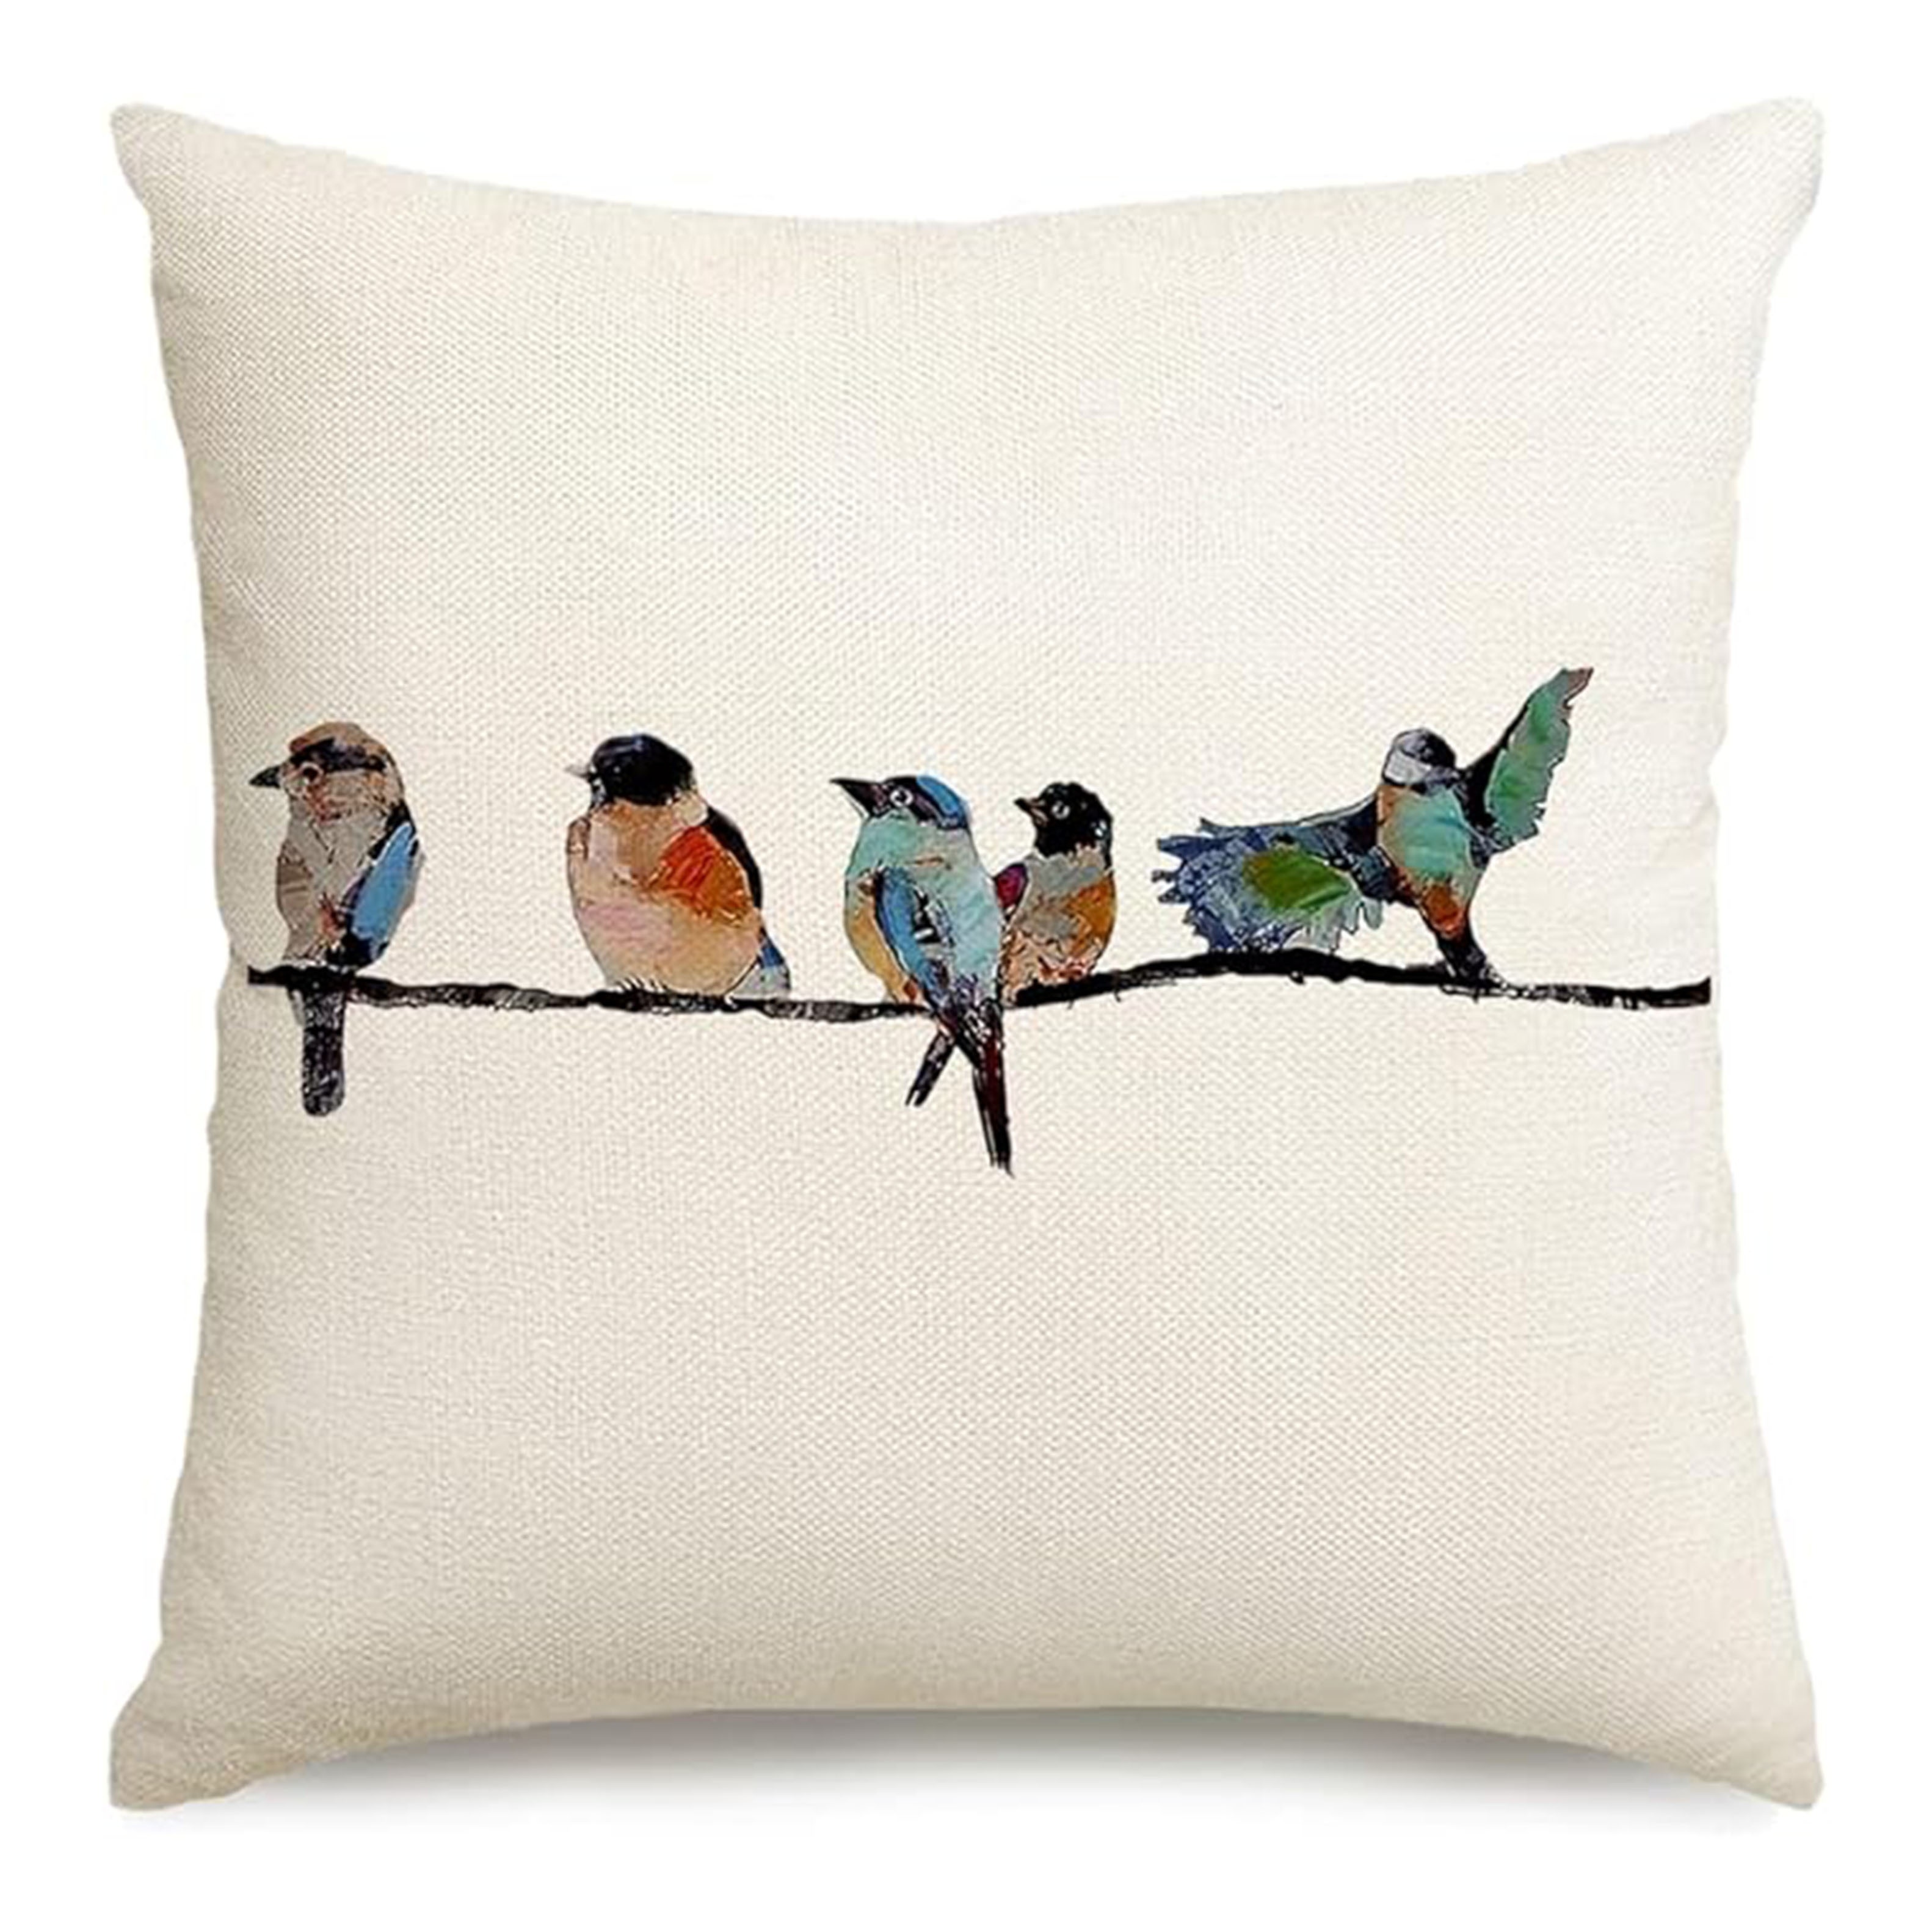 

Hand-painted Outdoor Birds Cotton Linen Throw Pillow Cover - Decorative Cushion Case For Sofa, Spring/summer Teal Blue Design, Machine Washable, Zip Closure - Fits 16x16, 18x18, 20x20 Inches